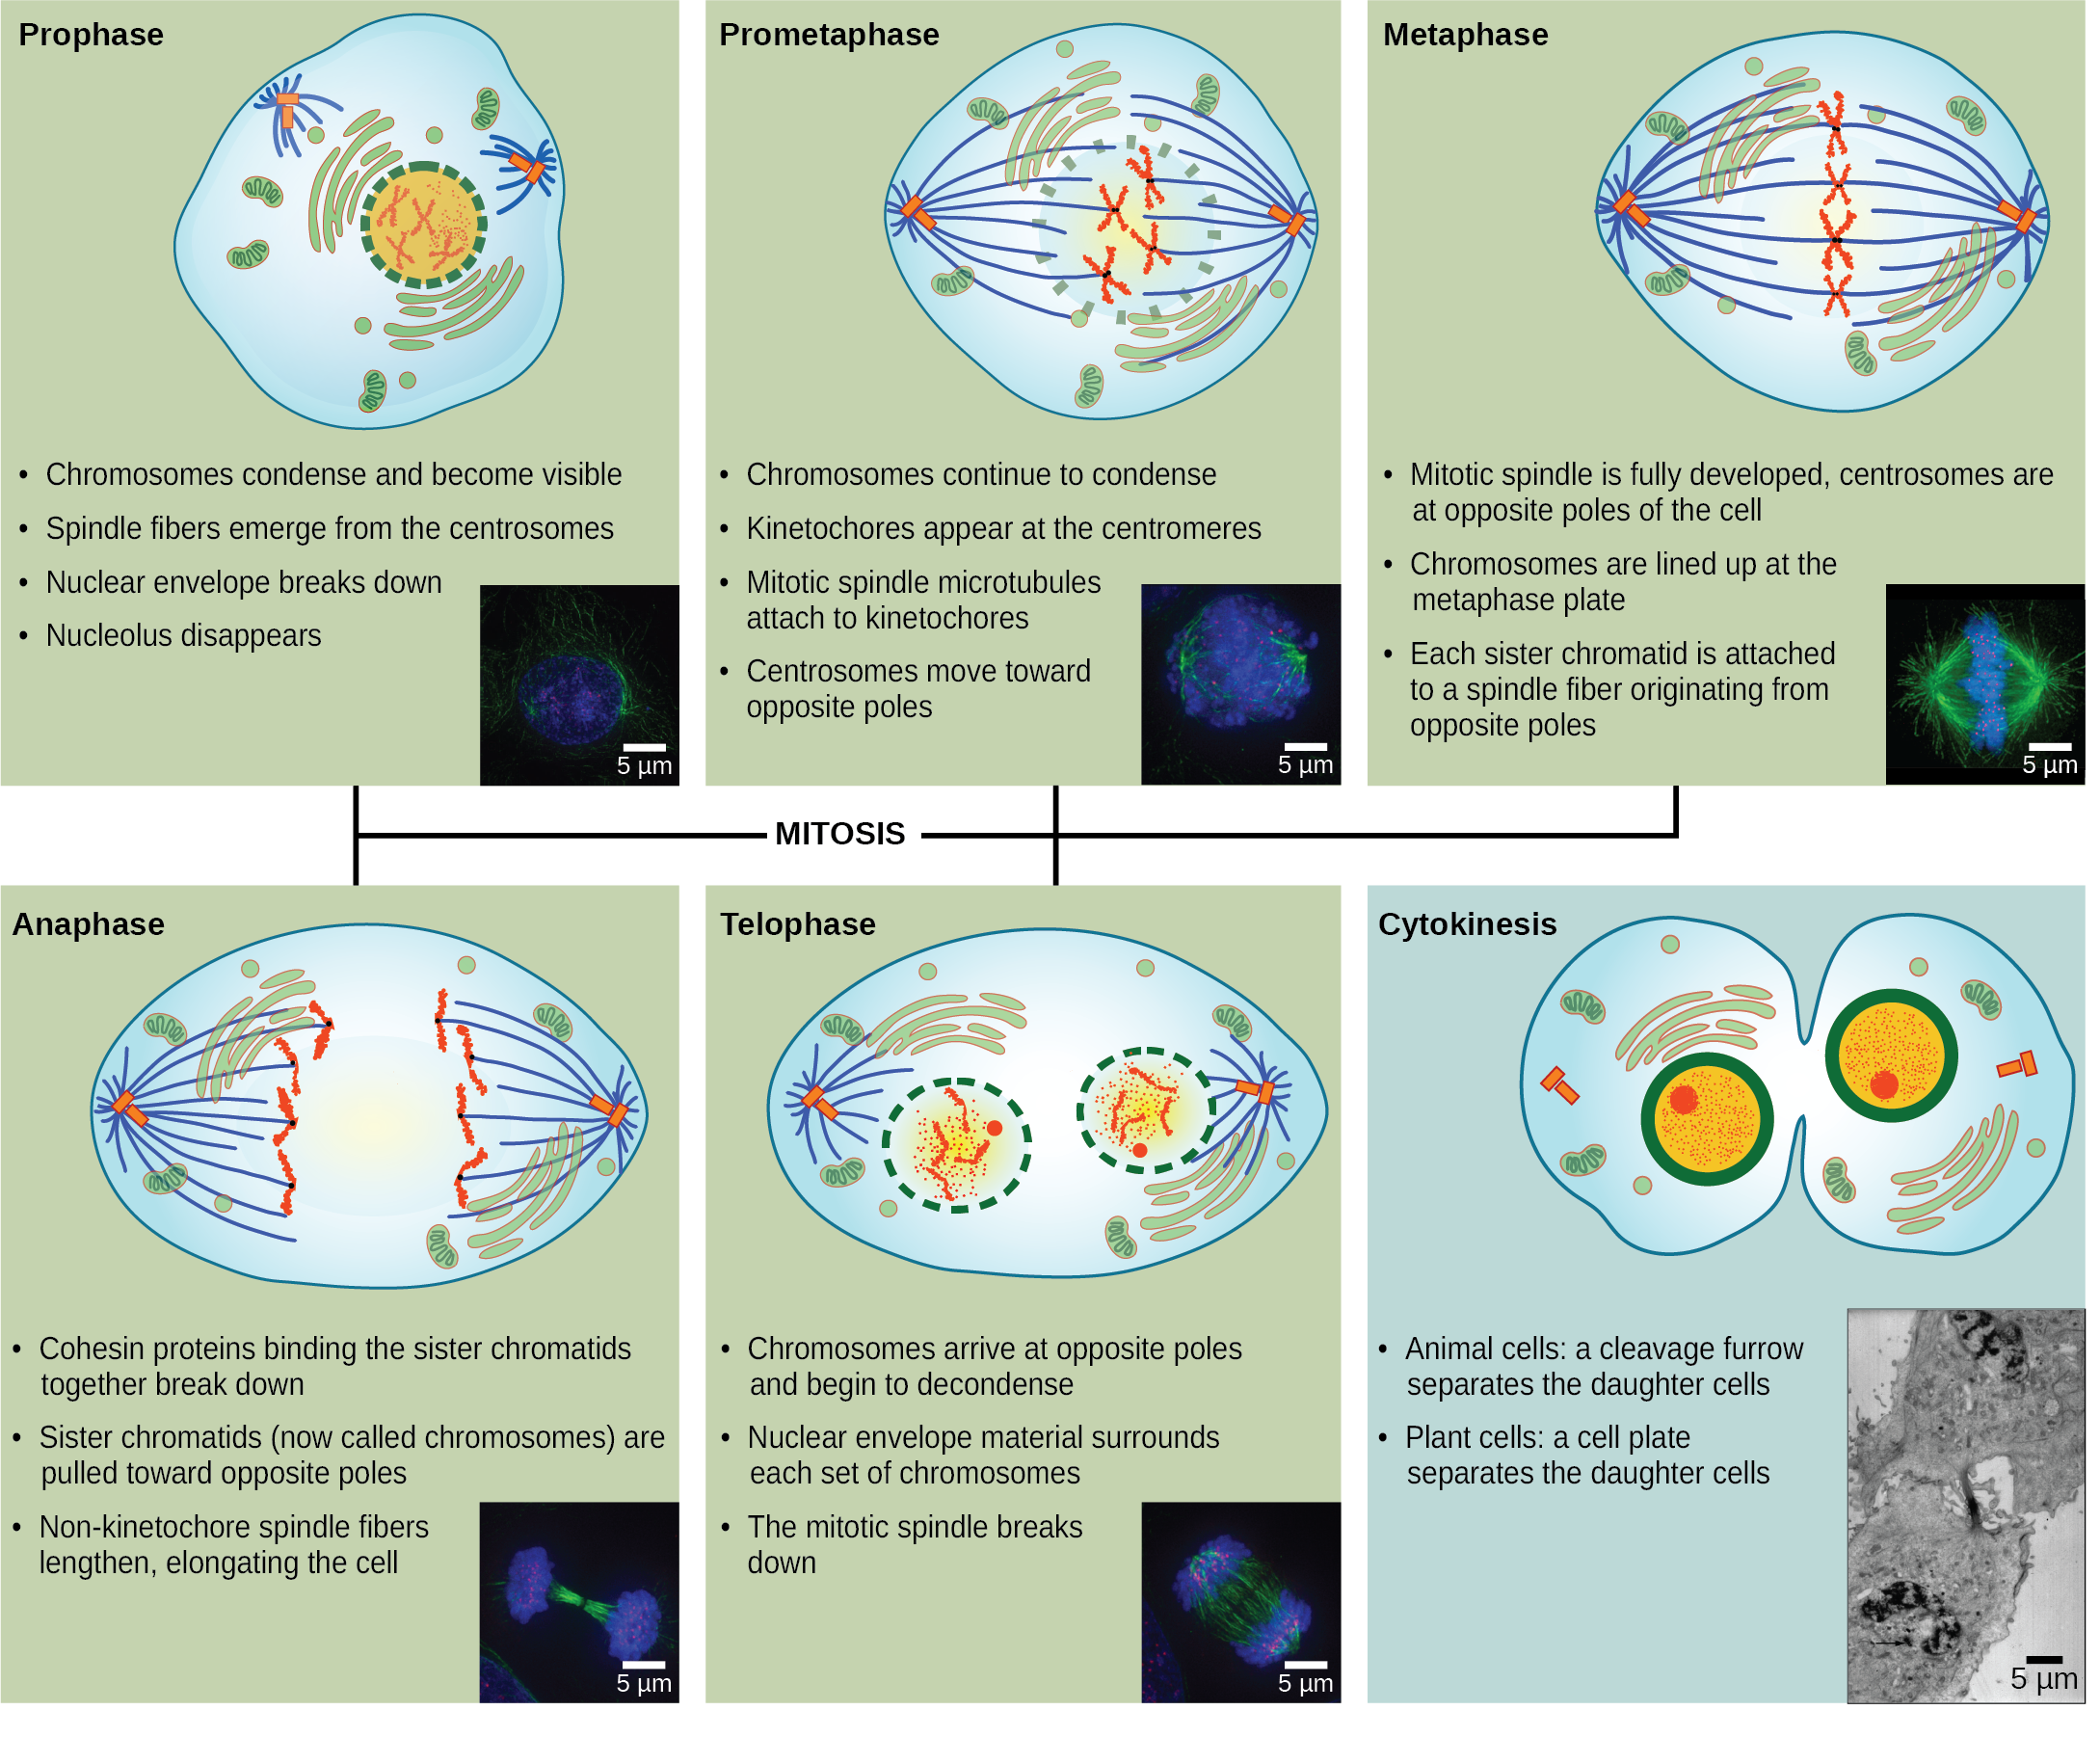 Six illustrations of Karyokinesis (or mitosis) is divided into five stages—prophase, prometaphase, metaphase, anaphase, and telophase. An a illustrations of cytokinesis